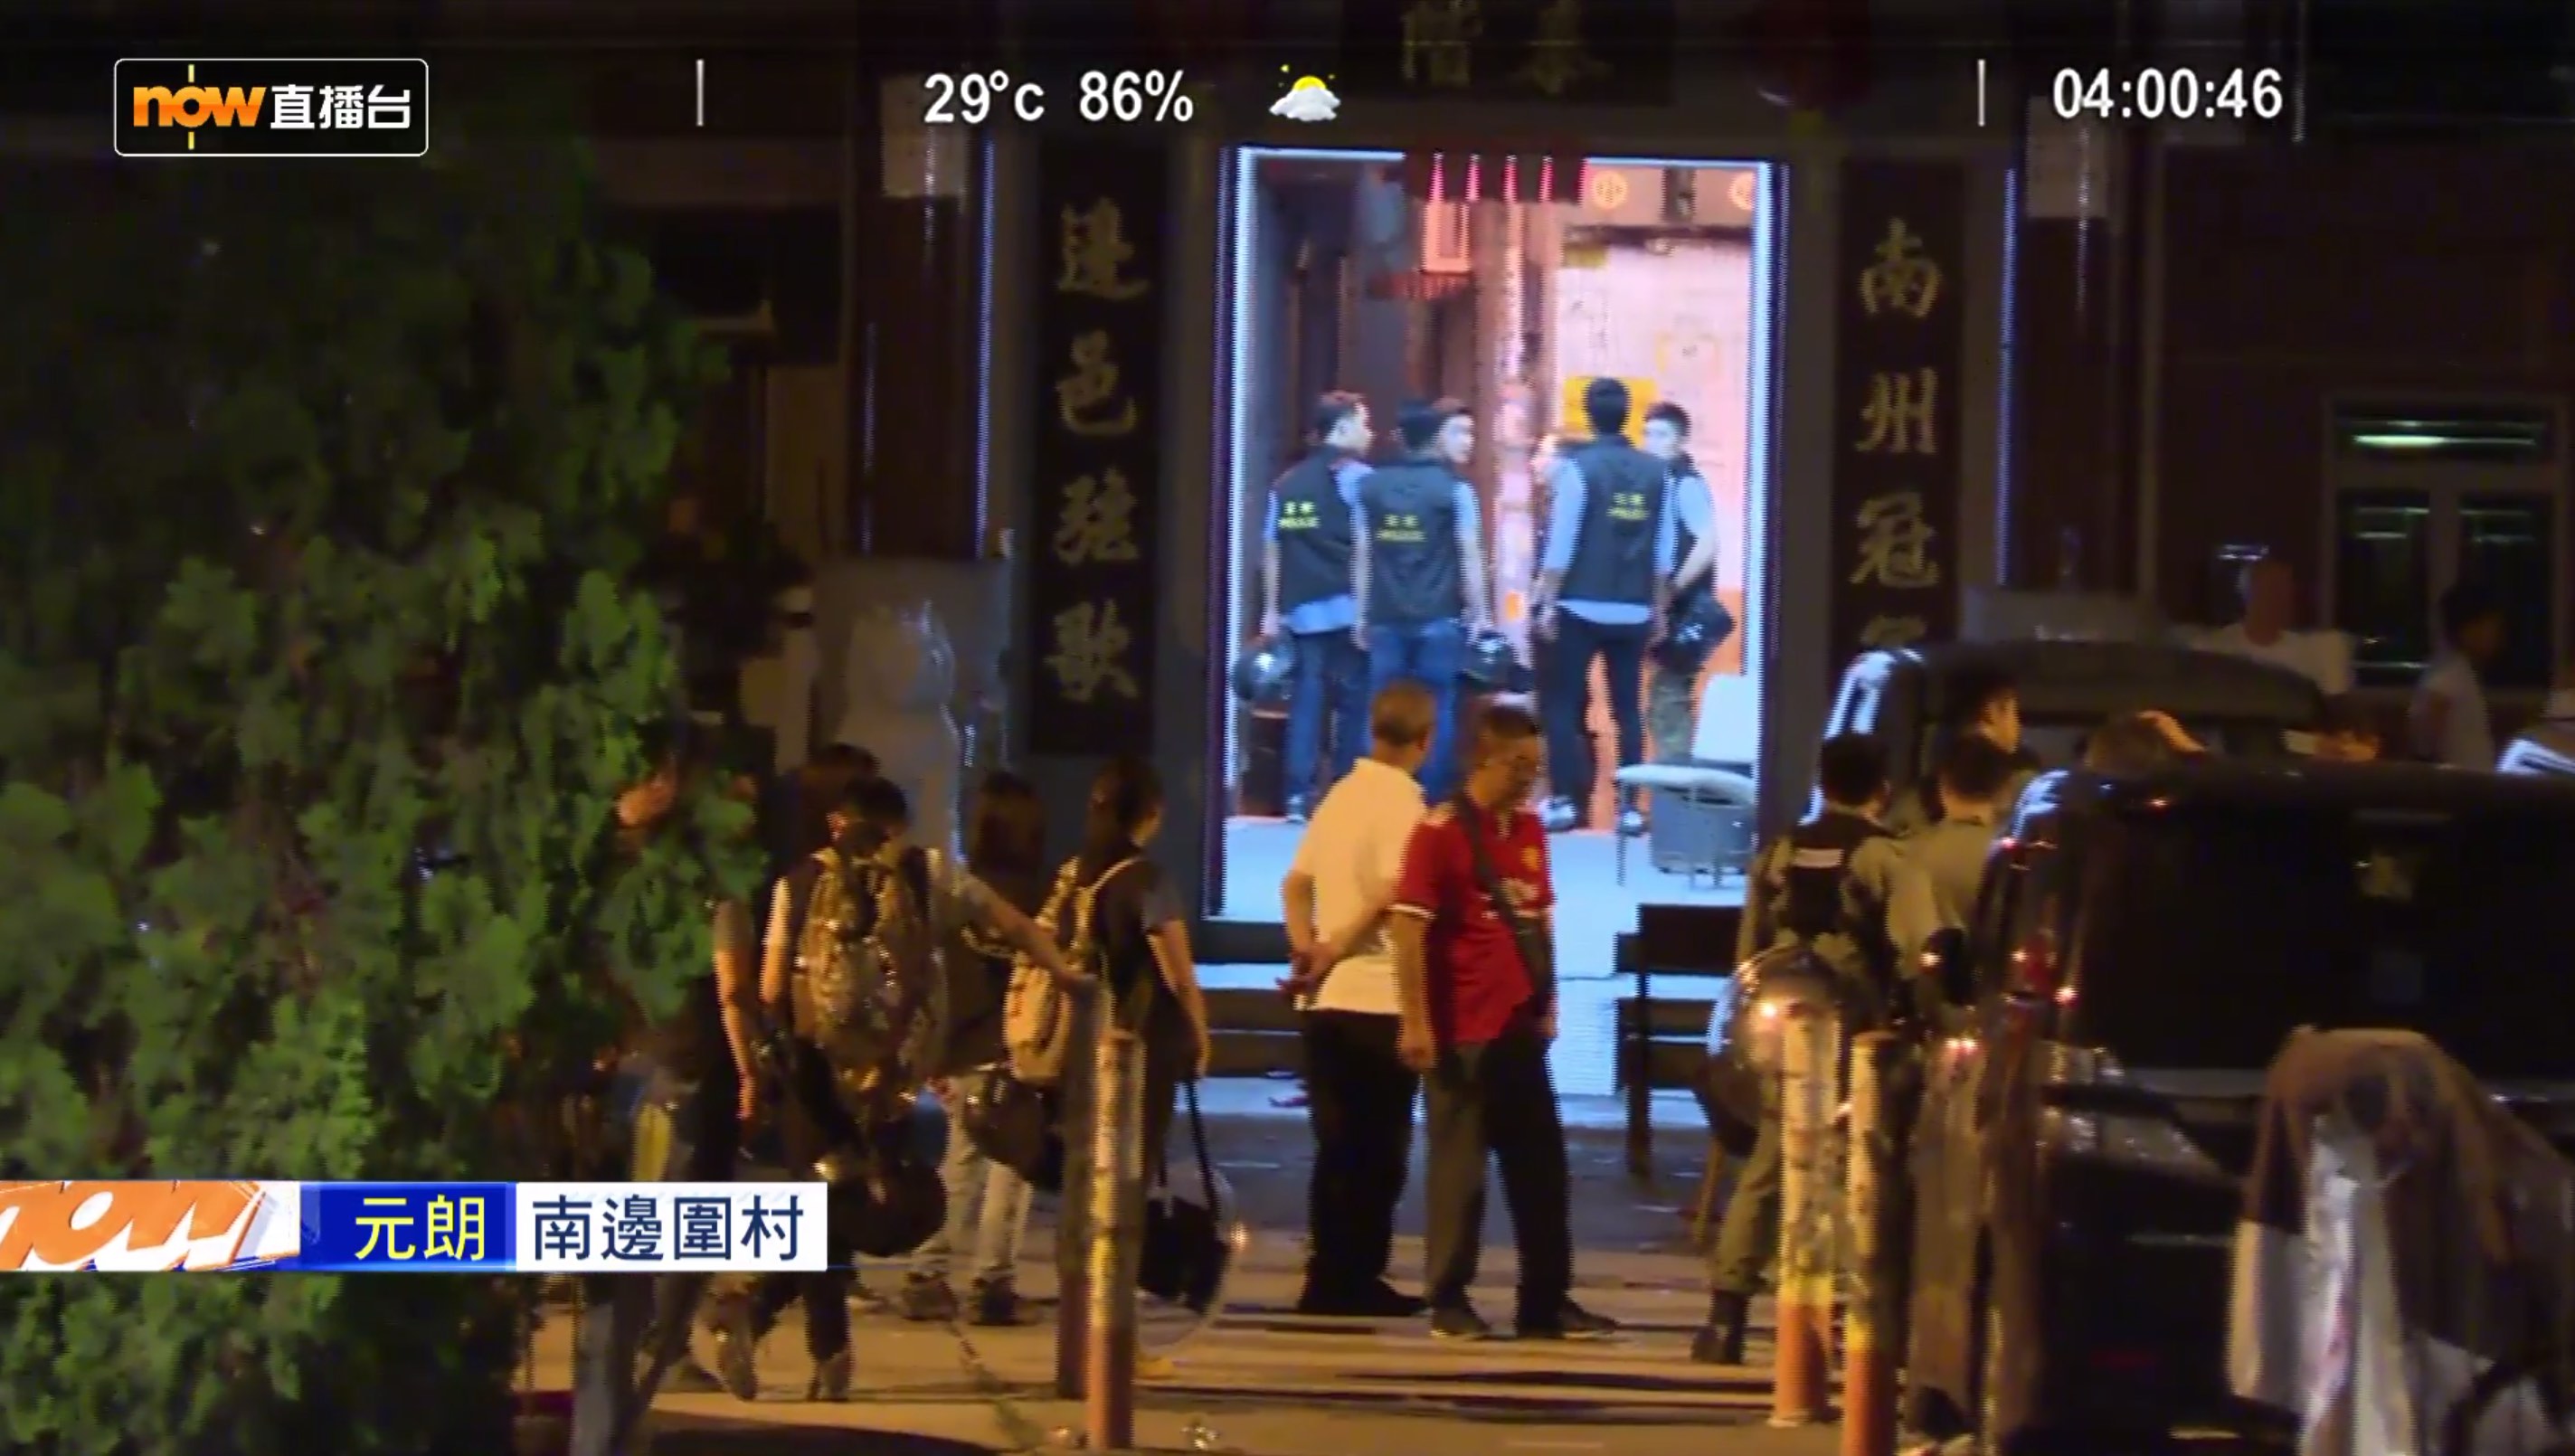 Police are seen chatting with white-shirted men inside a village office in the aftermath of the Yuen Long attacks in a livestream from the scene by Now TV. Screengrab via Facebook.